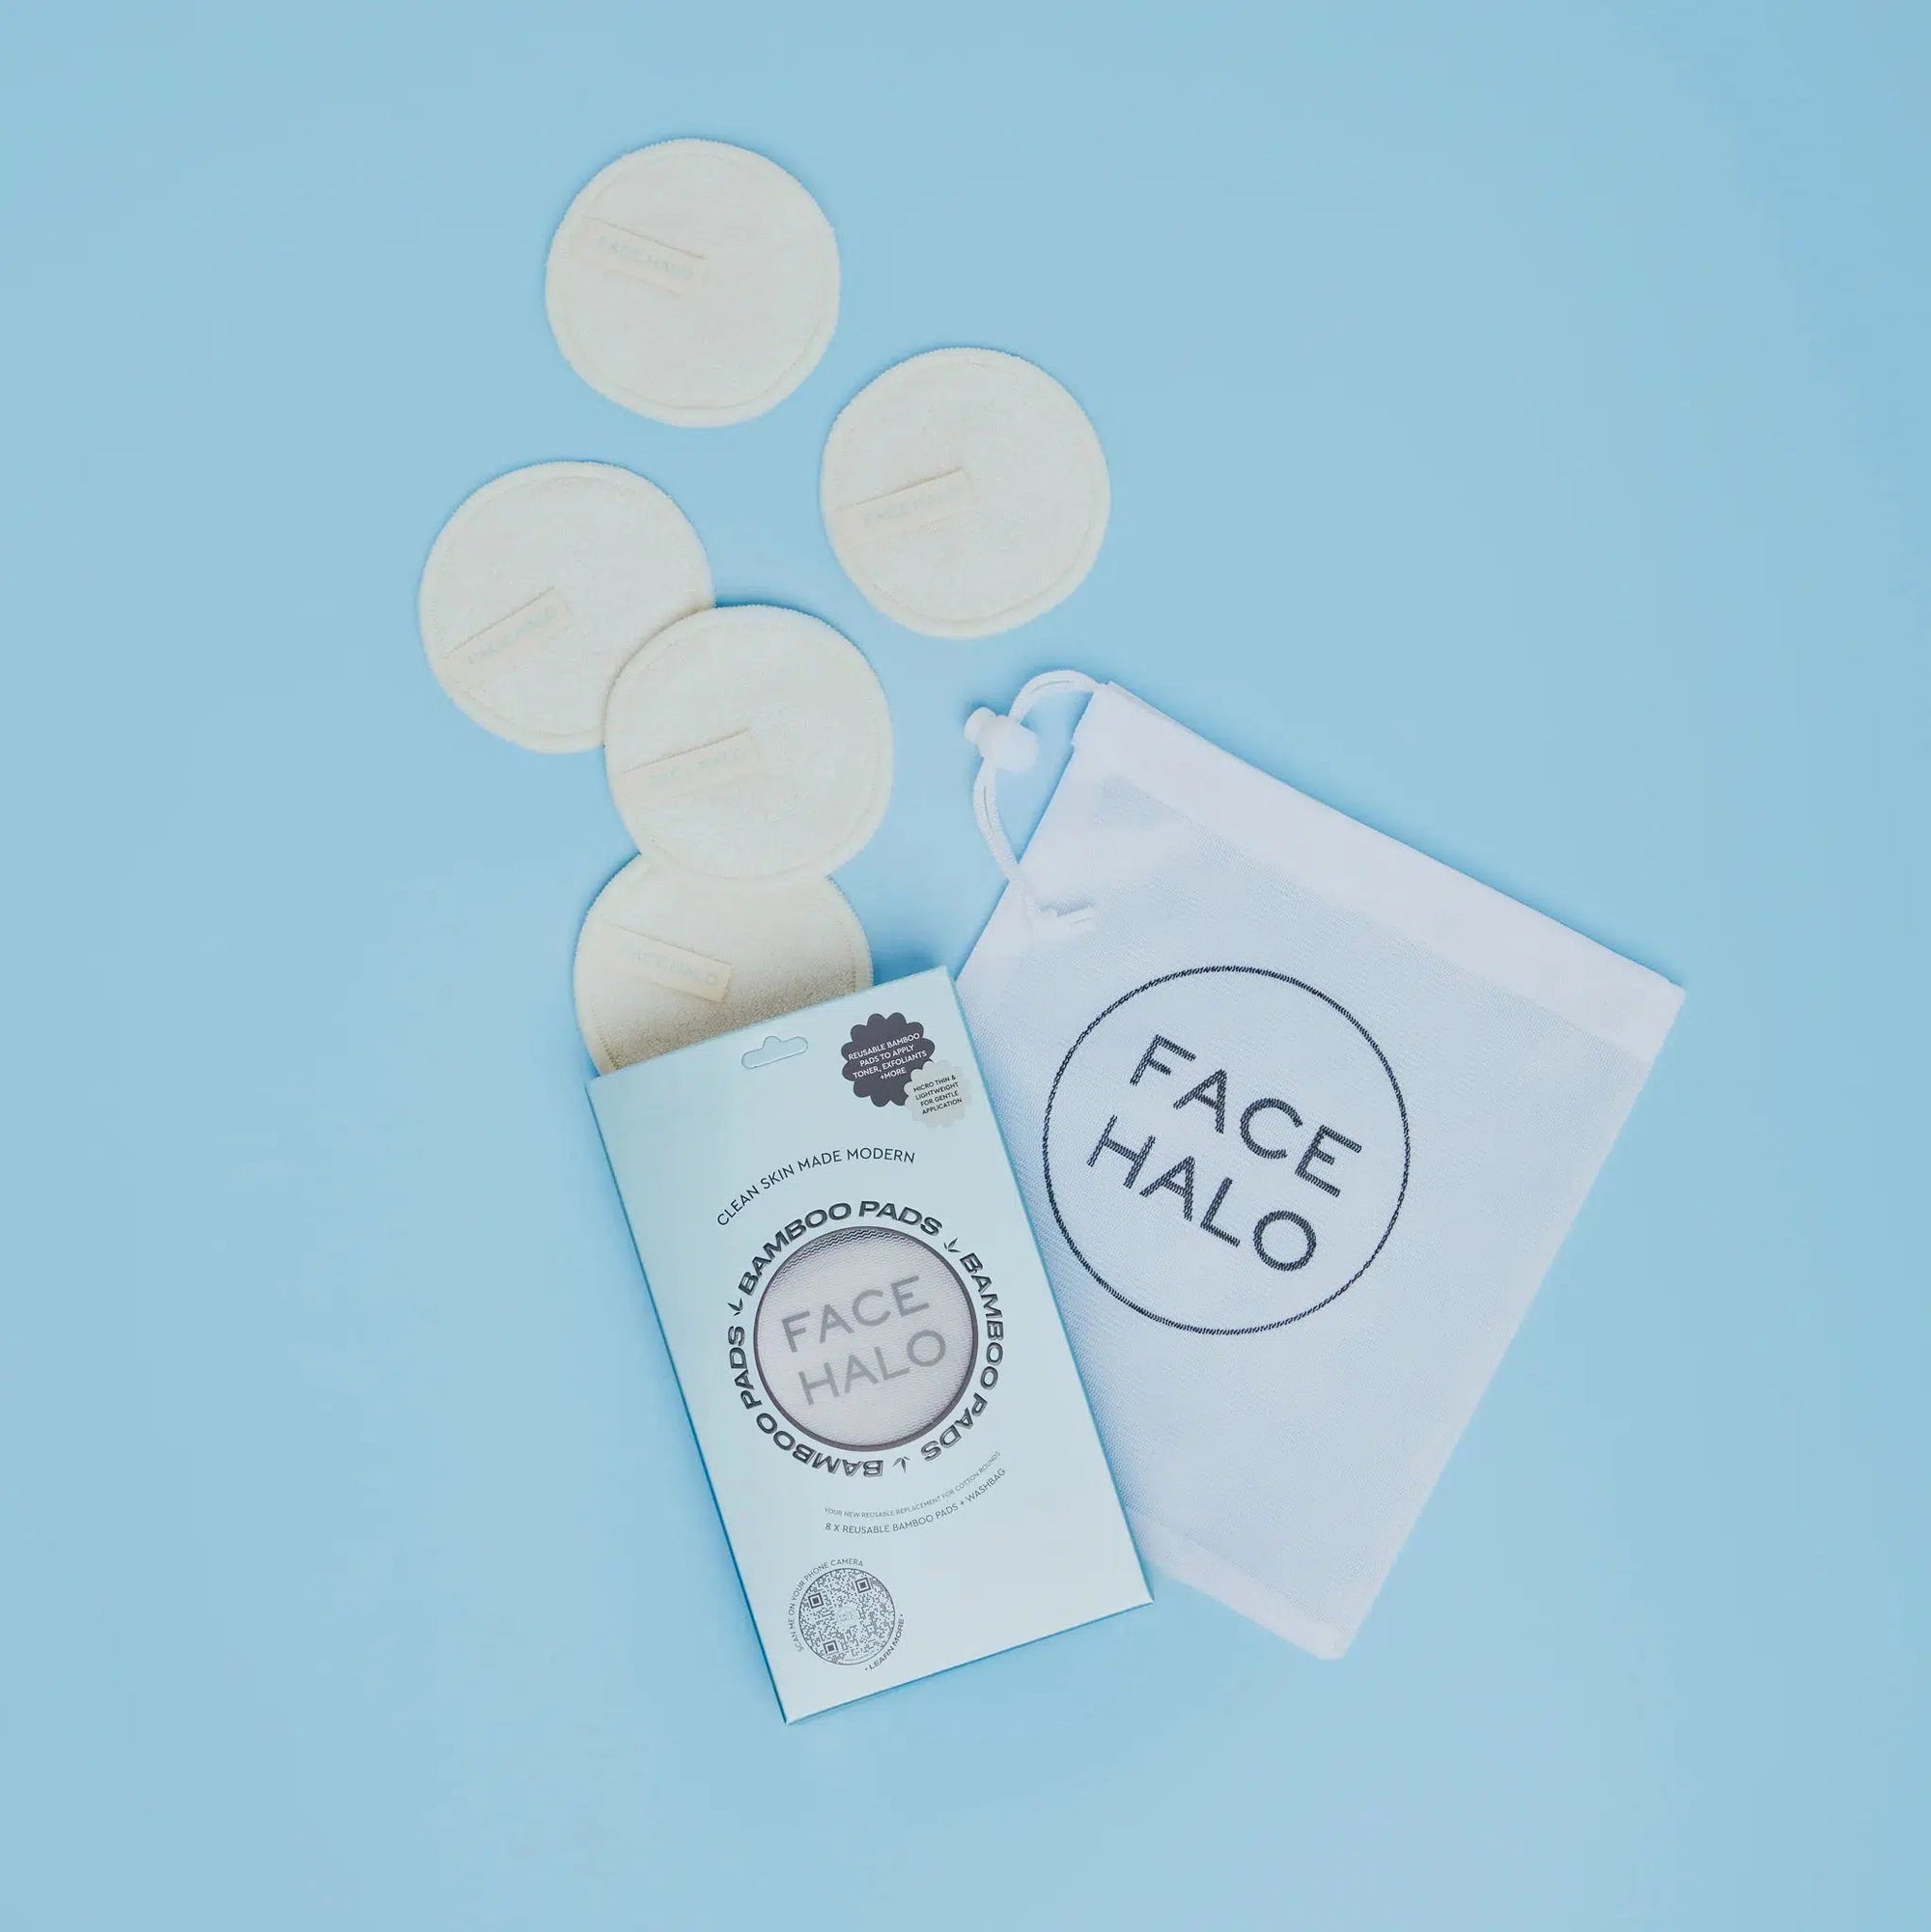 Face Halo Bamboo Pads